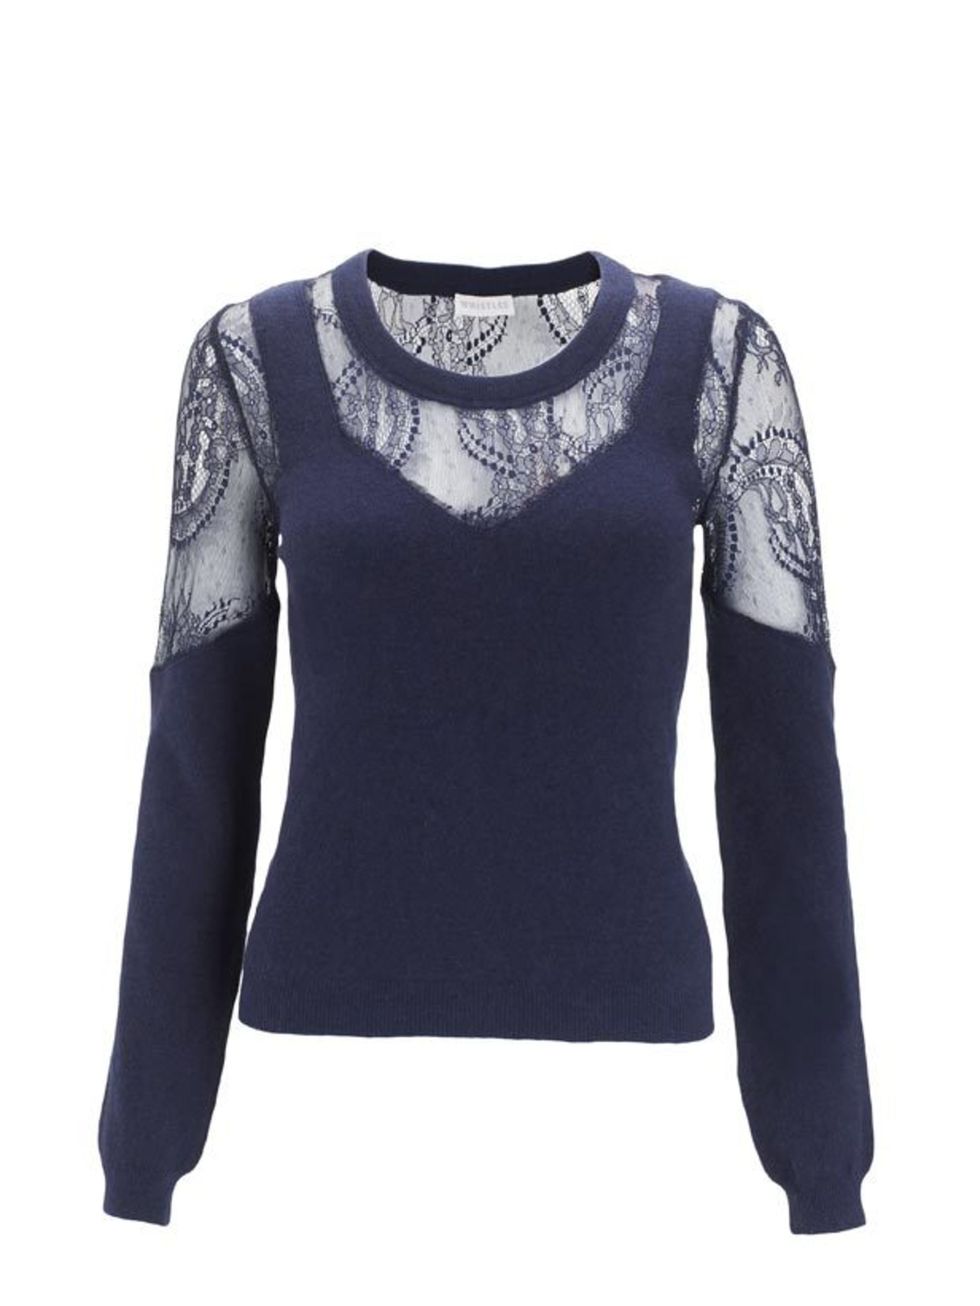 <p>Whistles navy lace sweater, £100, 0845 899 1222) </p>